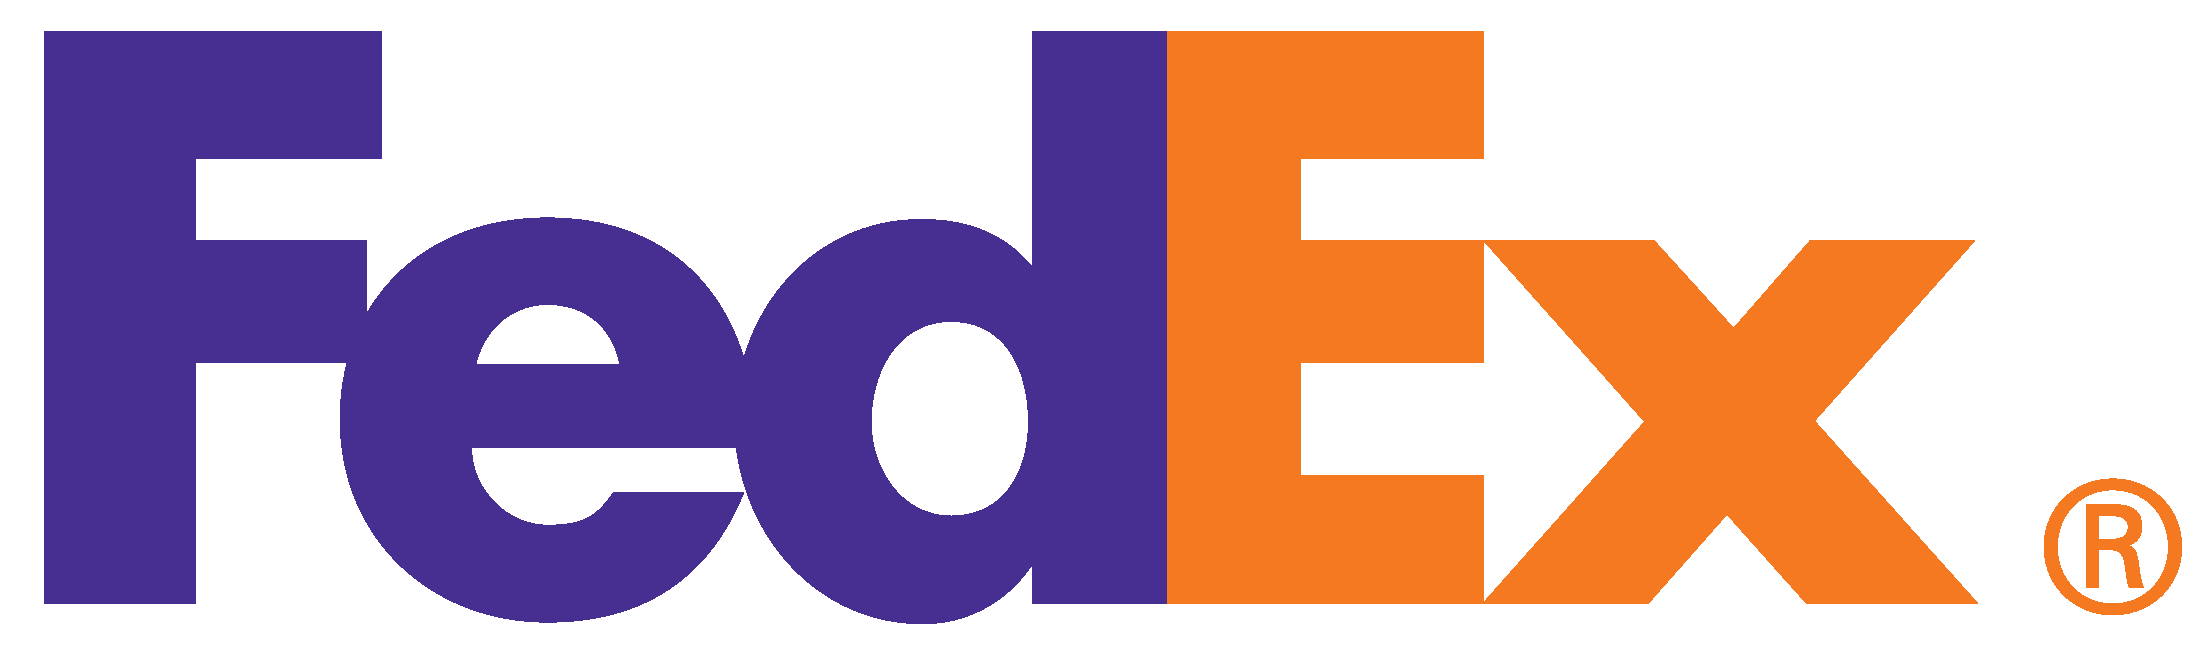 Fedex Office PNG - 115204